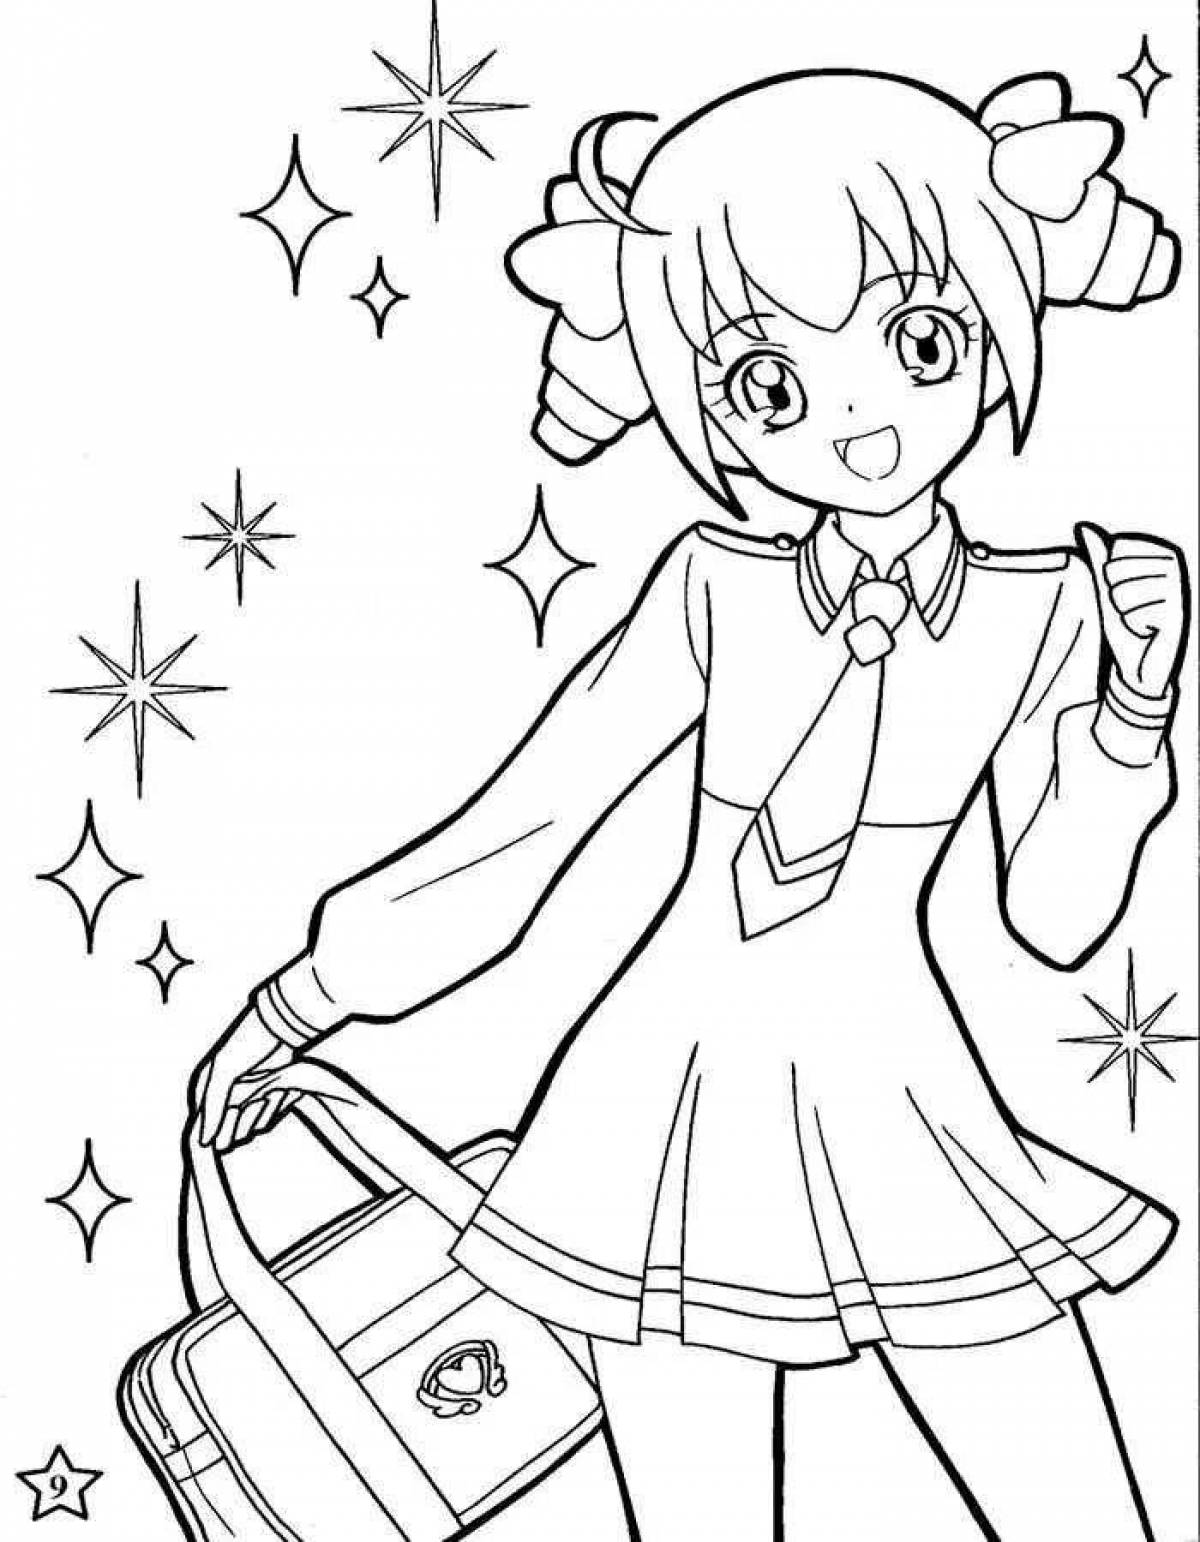 A fun anime coloring book for kids